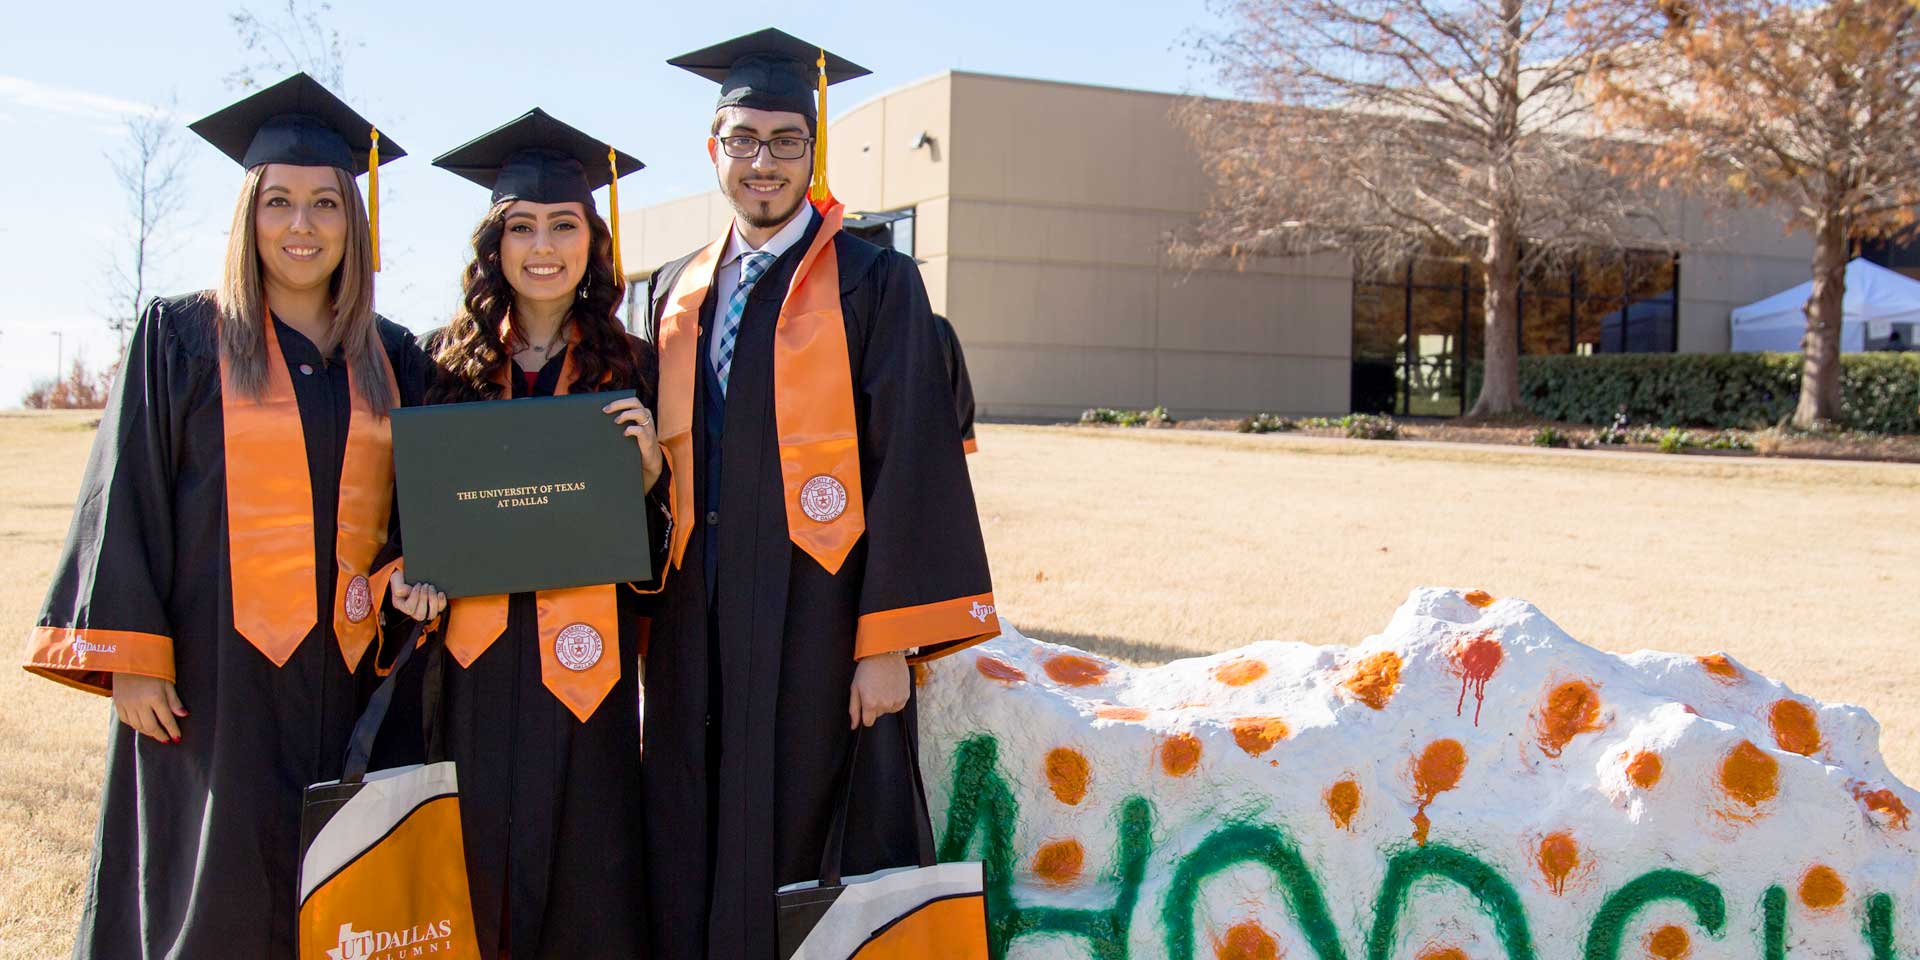 Bachelor's in supply chain management graduate Alfredo Beltran with two friends who graduated with bachelor's degrees at the Jindal School, UT Dallas